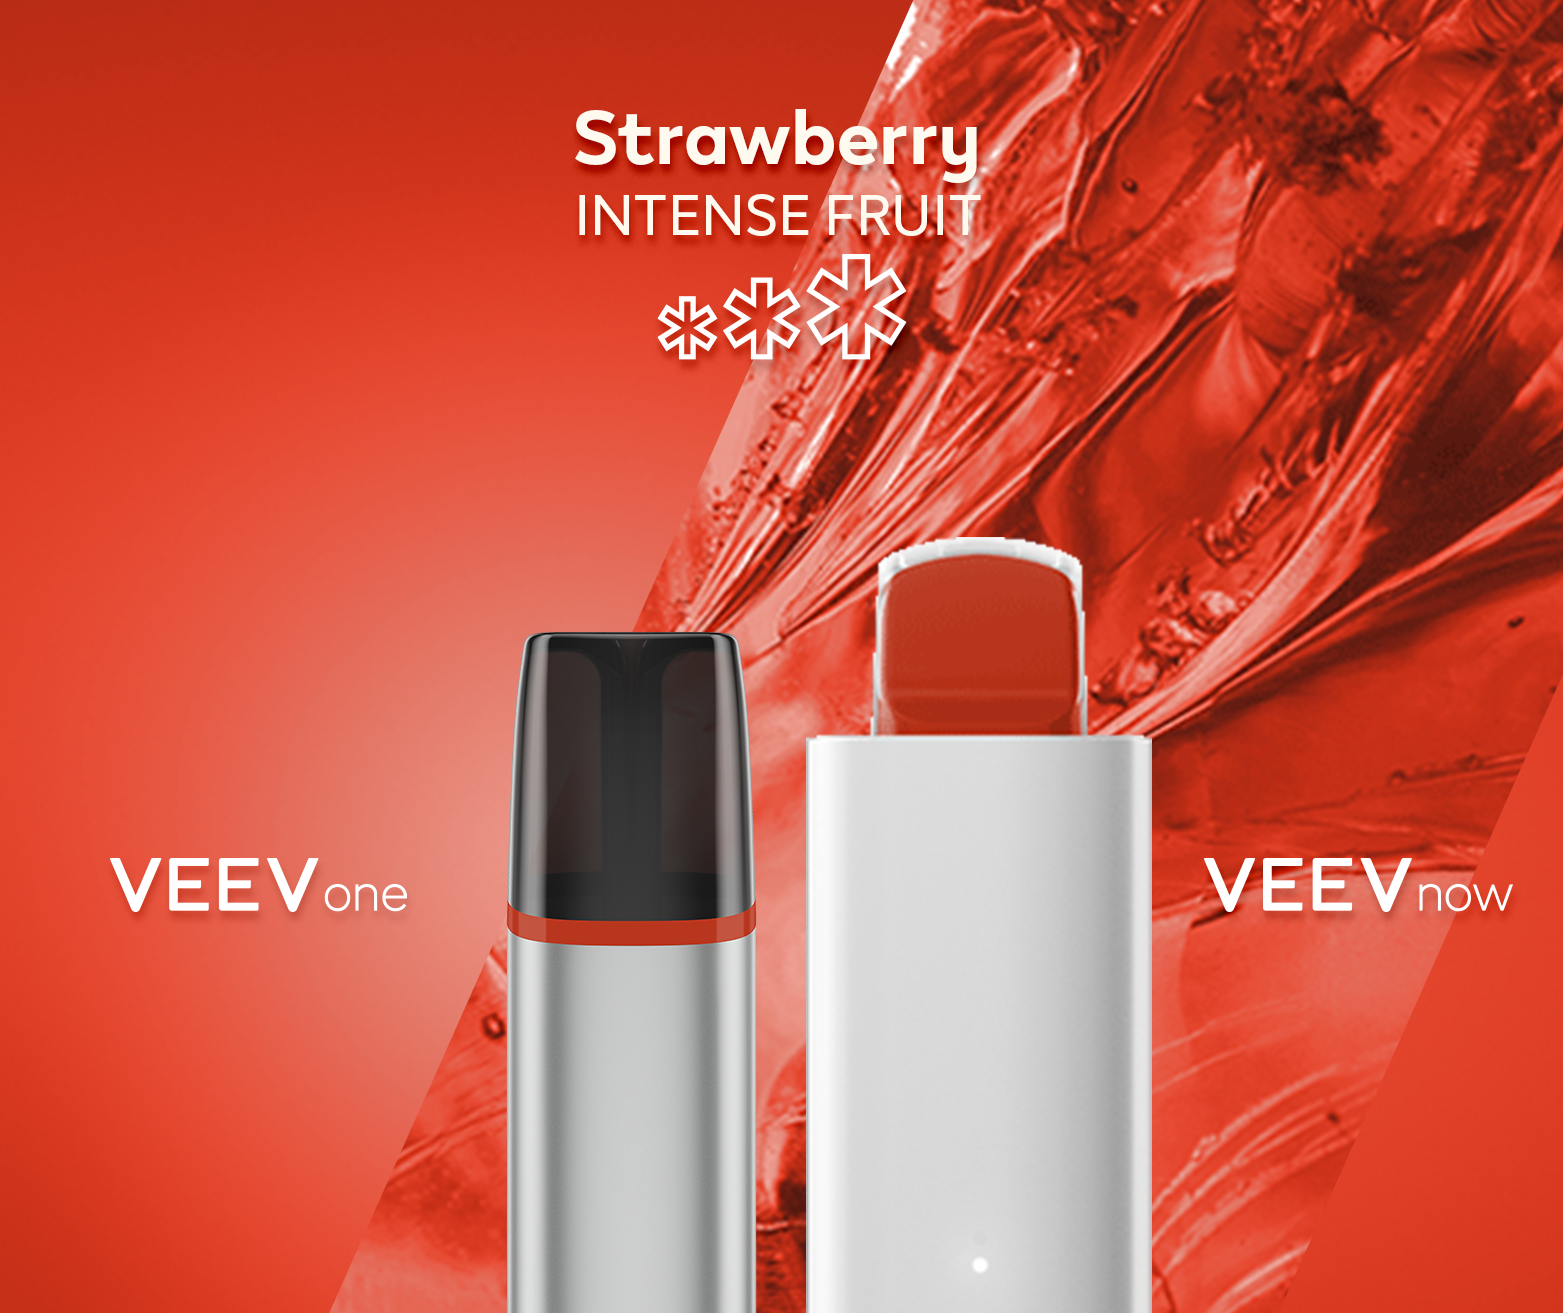 Strawbery VEEV ONE device and VEEV NOW 5 mL disposable- Intense Fruit